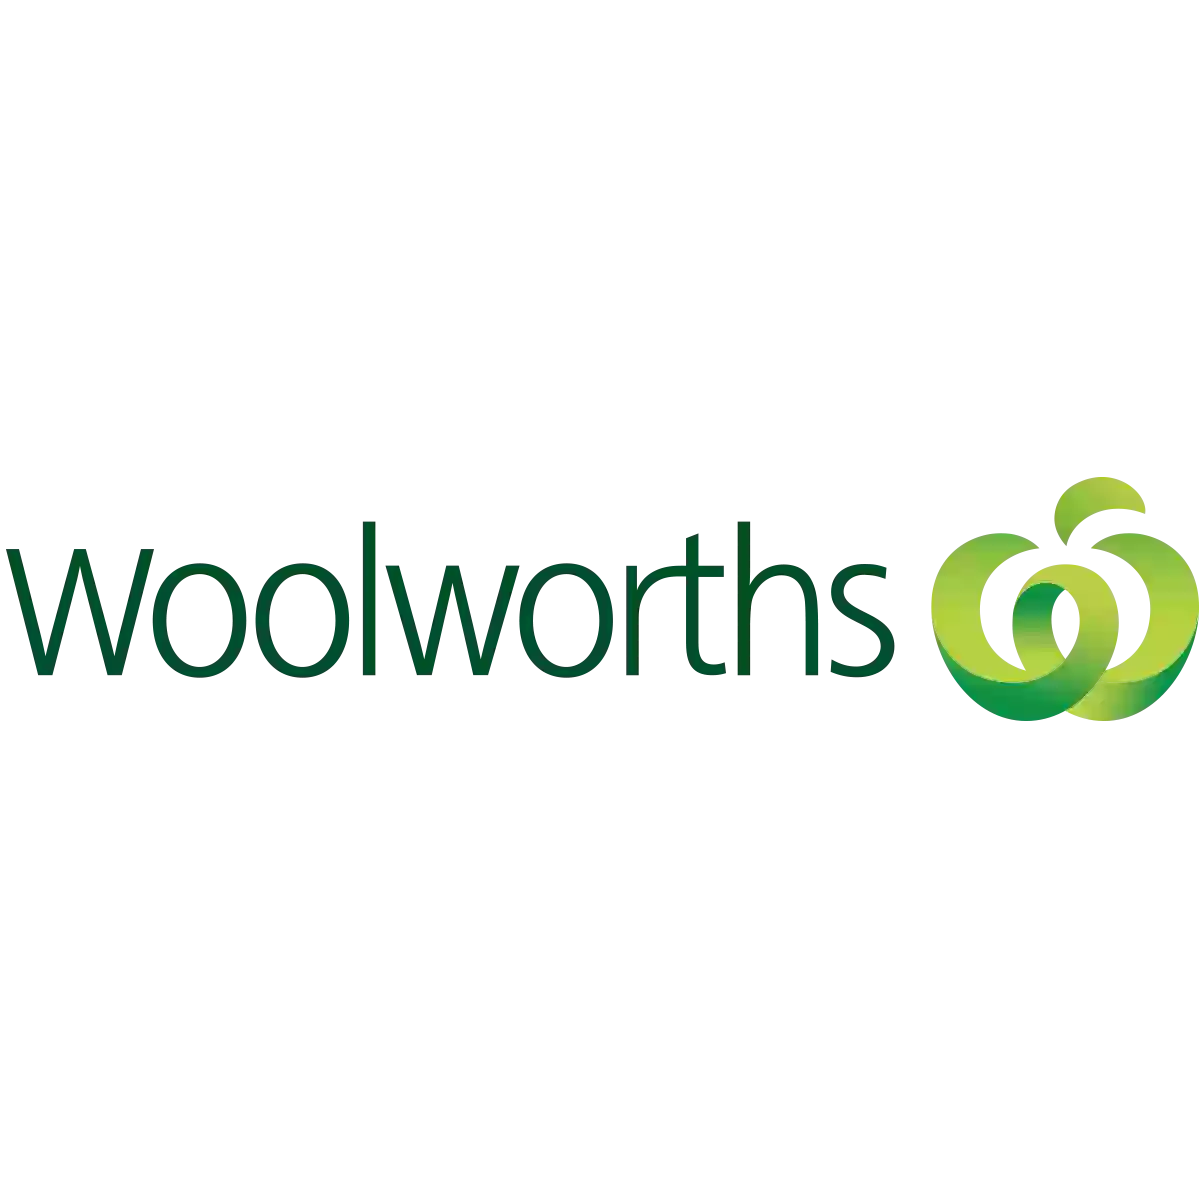 Woolworths Spearwood